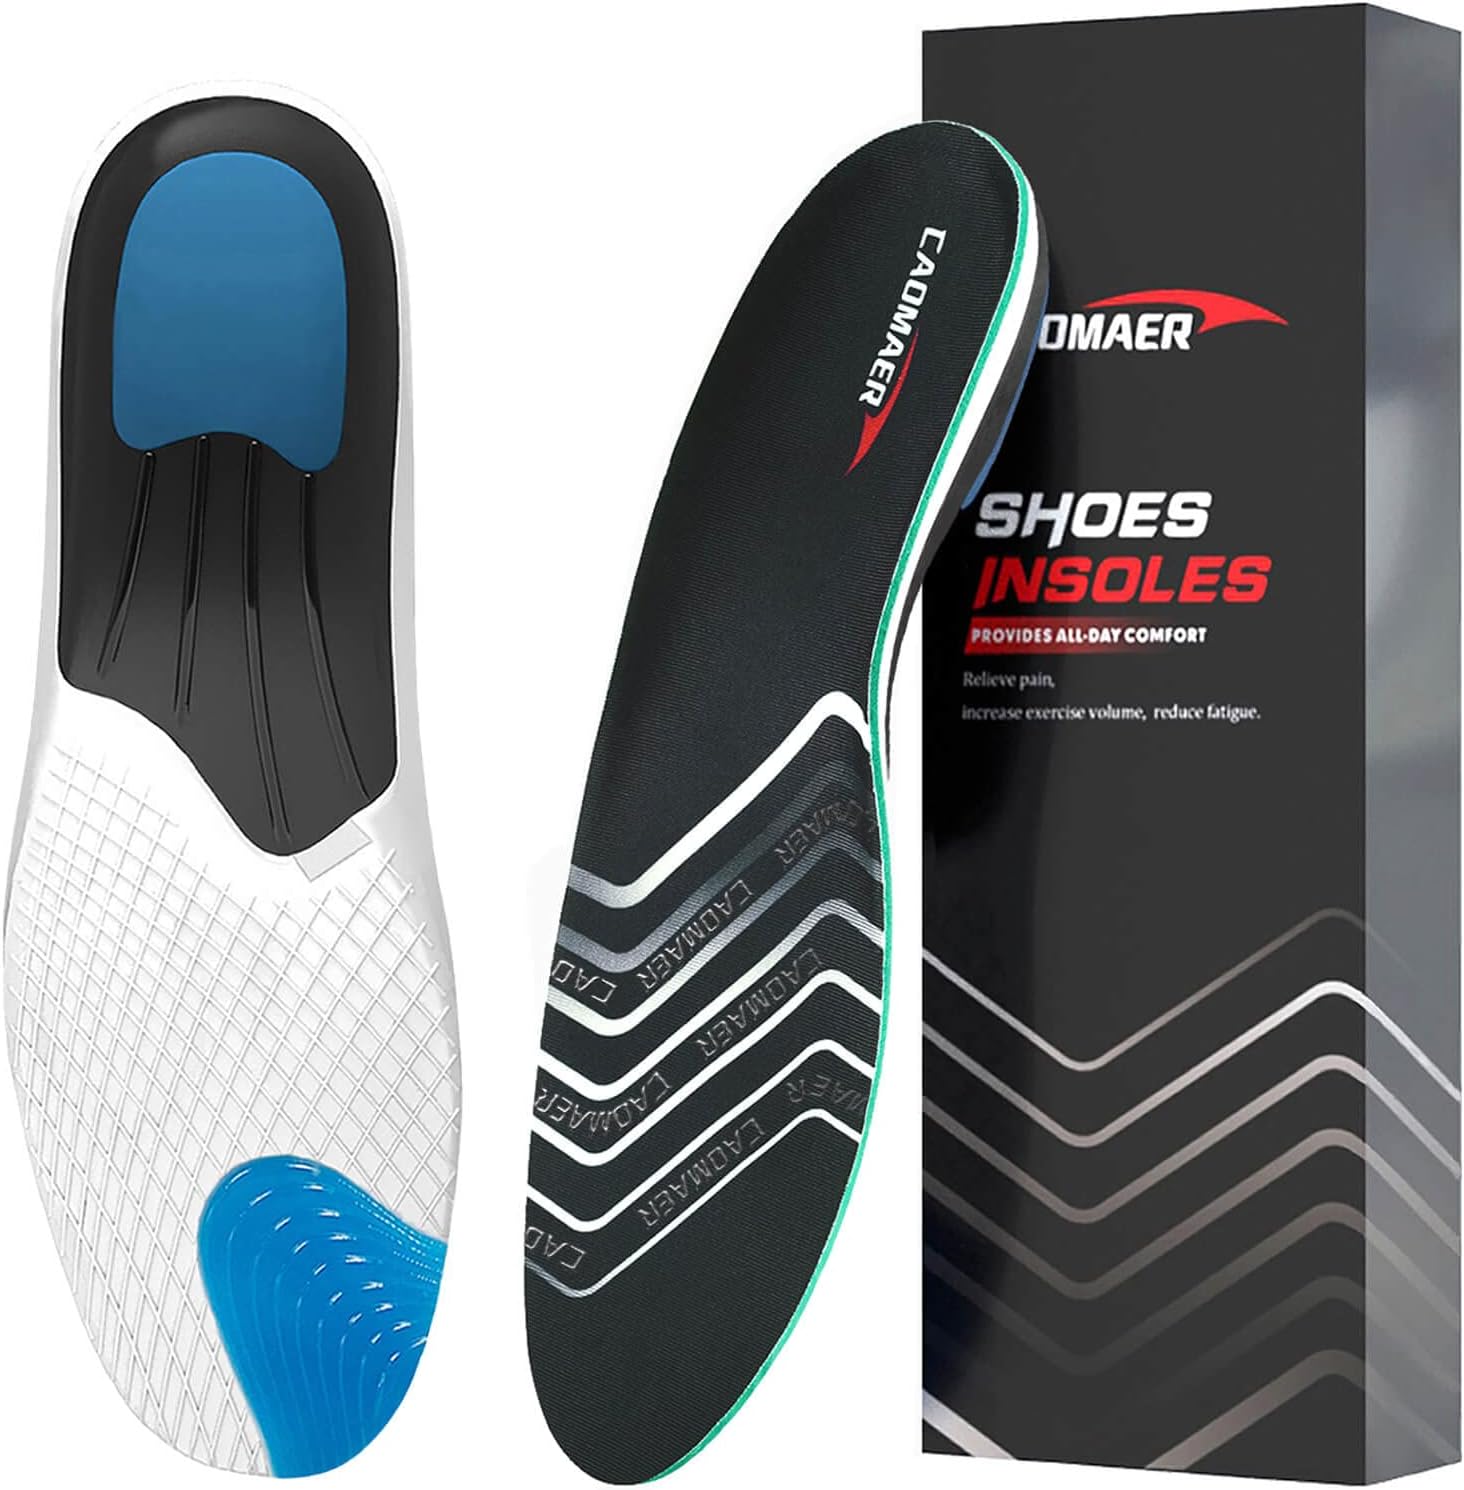 Caomaer Plantar Fasciitis Relief Insoles for Men and Women, Arch Support Shoe Inserts for Flat Feet, Heel and Foot Pain Relief